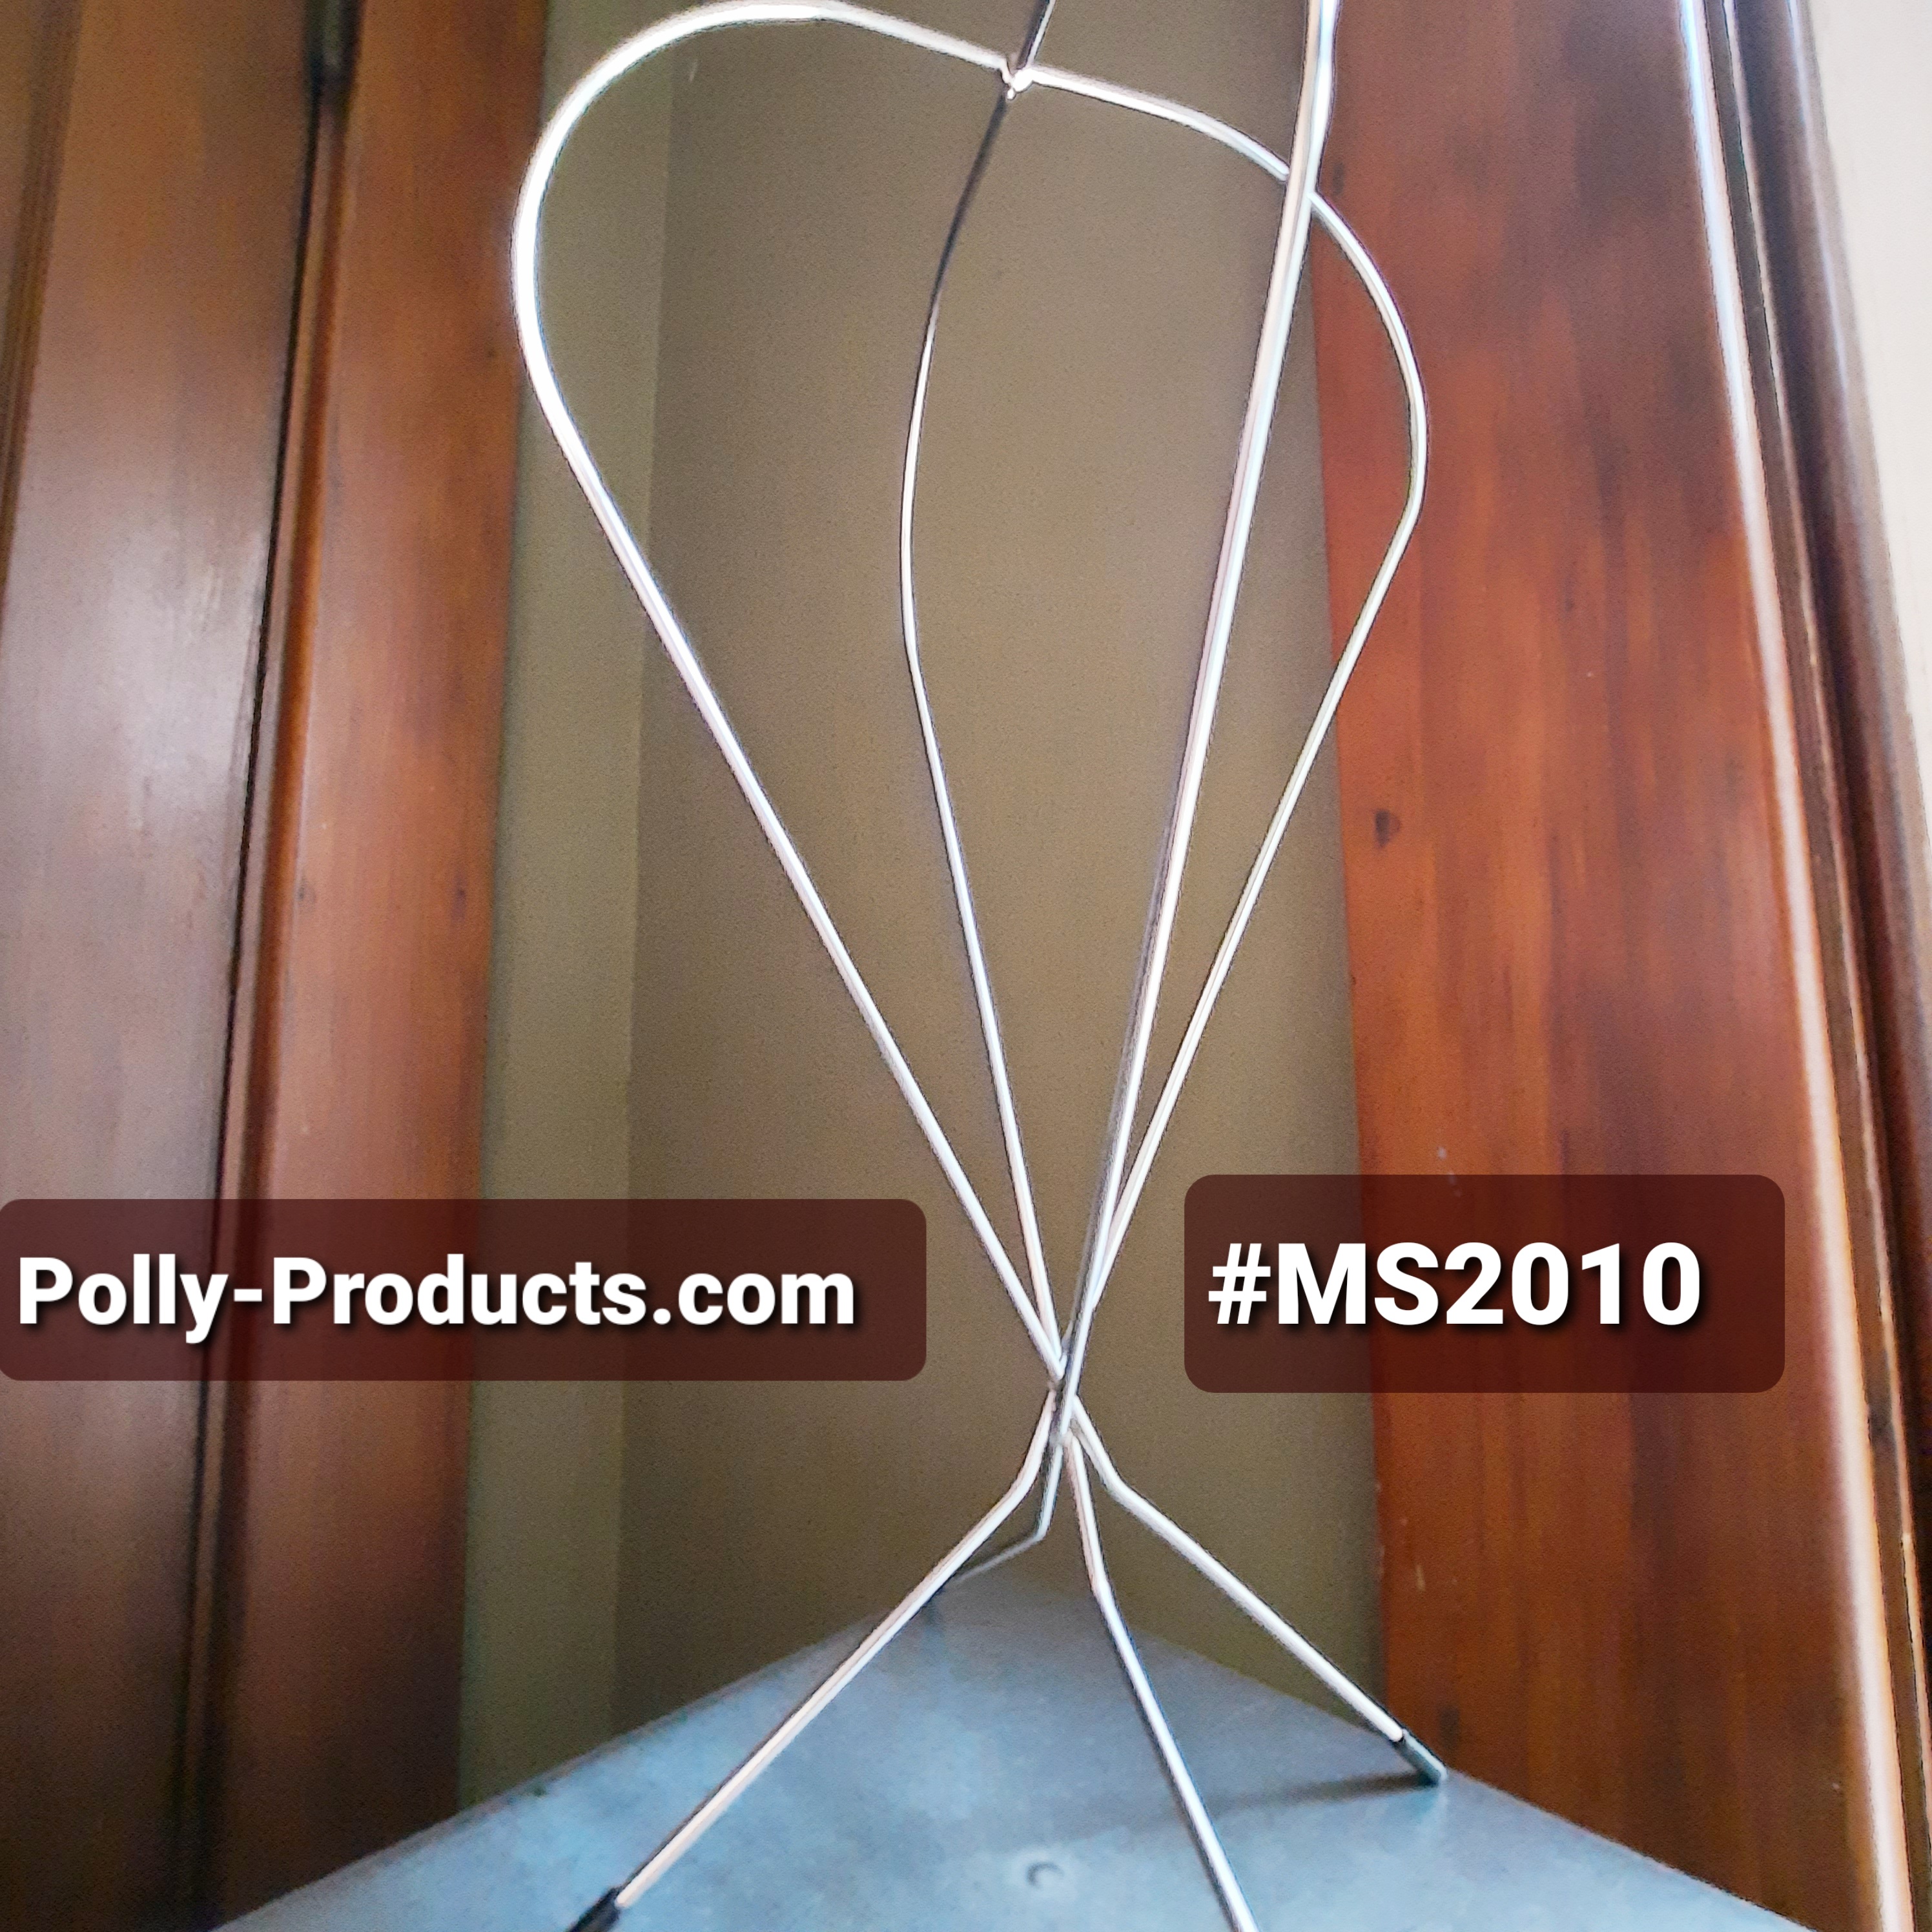 #MS2010X 12"H METAL HAT & WIG STAND BY POLLY PRODUCTS. MADE IN THE USA QUALITY.